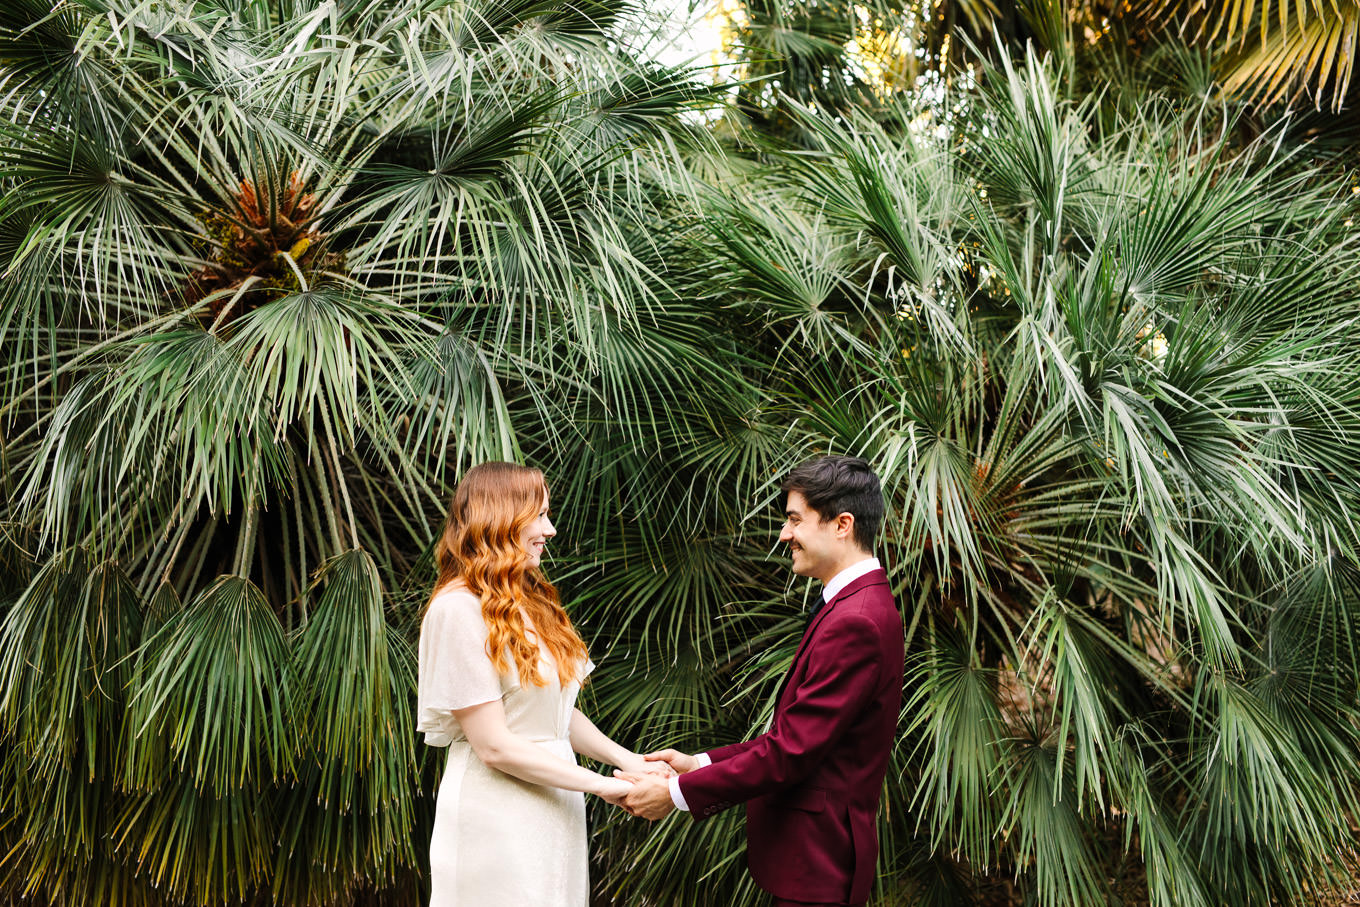 Elopement portrait in front of palms | Los Angeles Arboretum Elopement | Colorful and elevated wedding photography for fun-loving couples in Southern California | #LosAngelesElopement #elopement #LAarboretum #LAskyline #elopementphotos   Source: Mary Costa Photography | Los Angeles